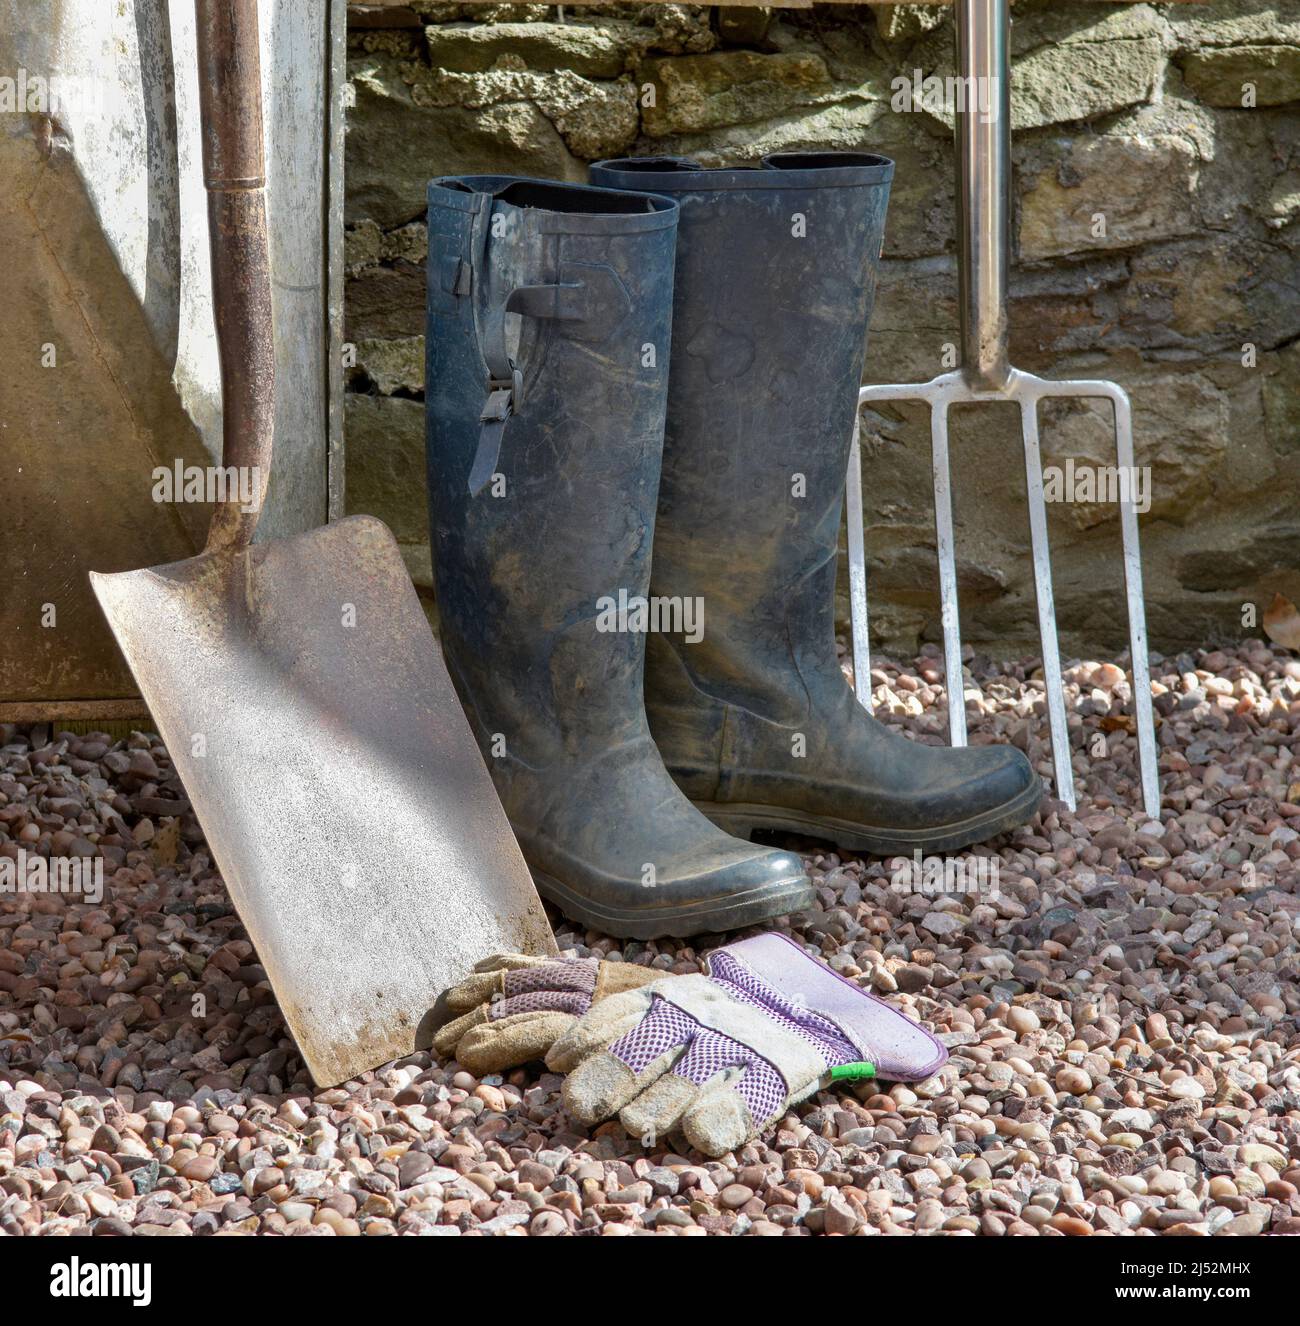 Gardening items including large spade, large fork, gloves and wellies against stone wall Stock Photo